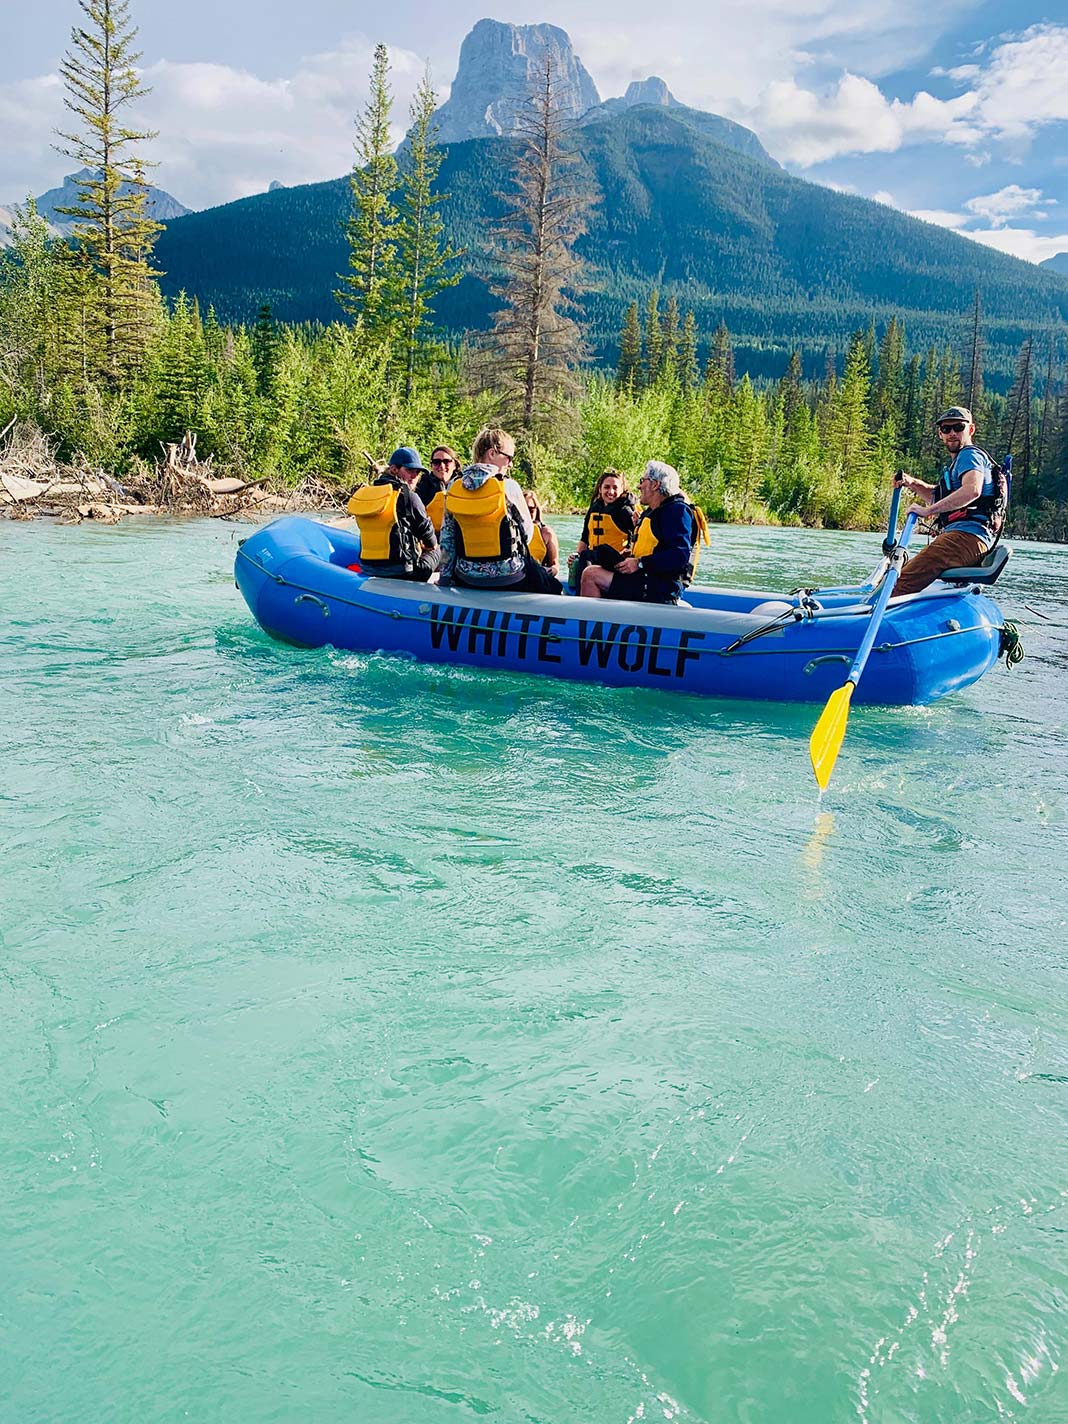 People in a blue raft with mountain in background